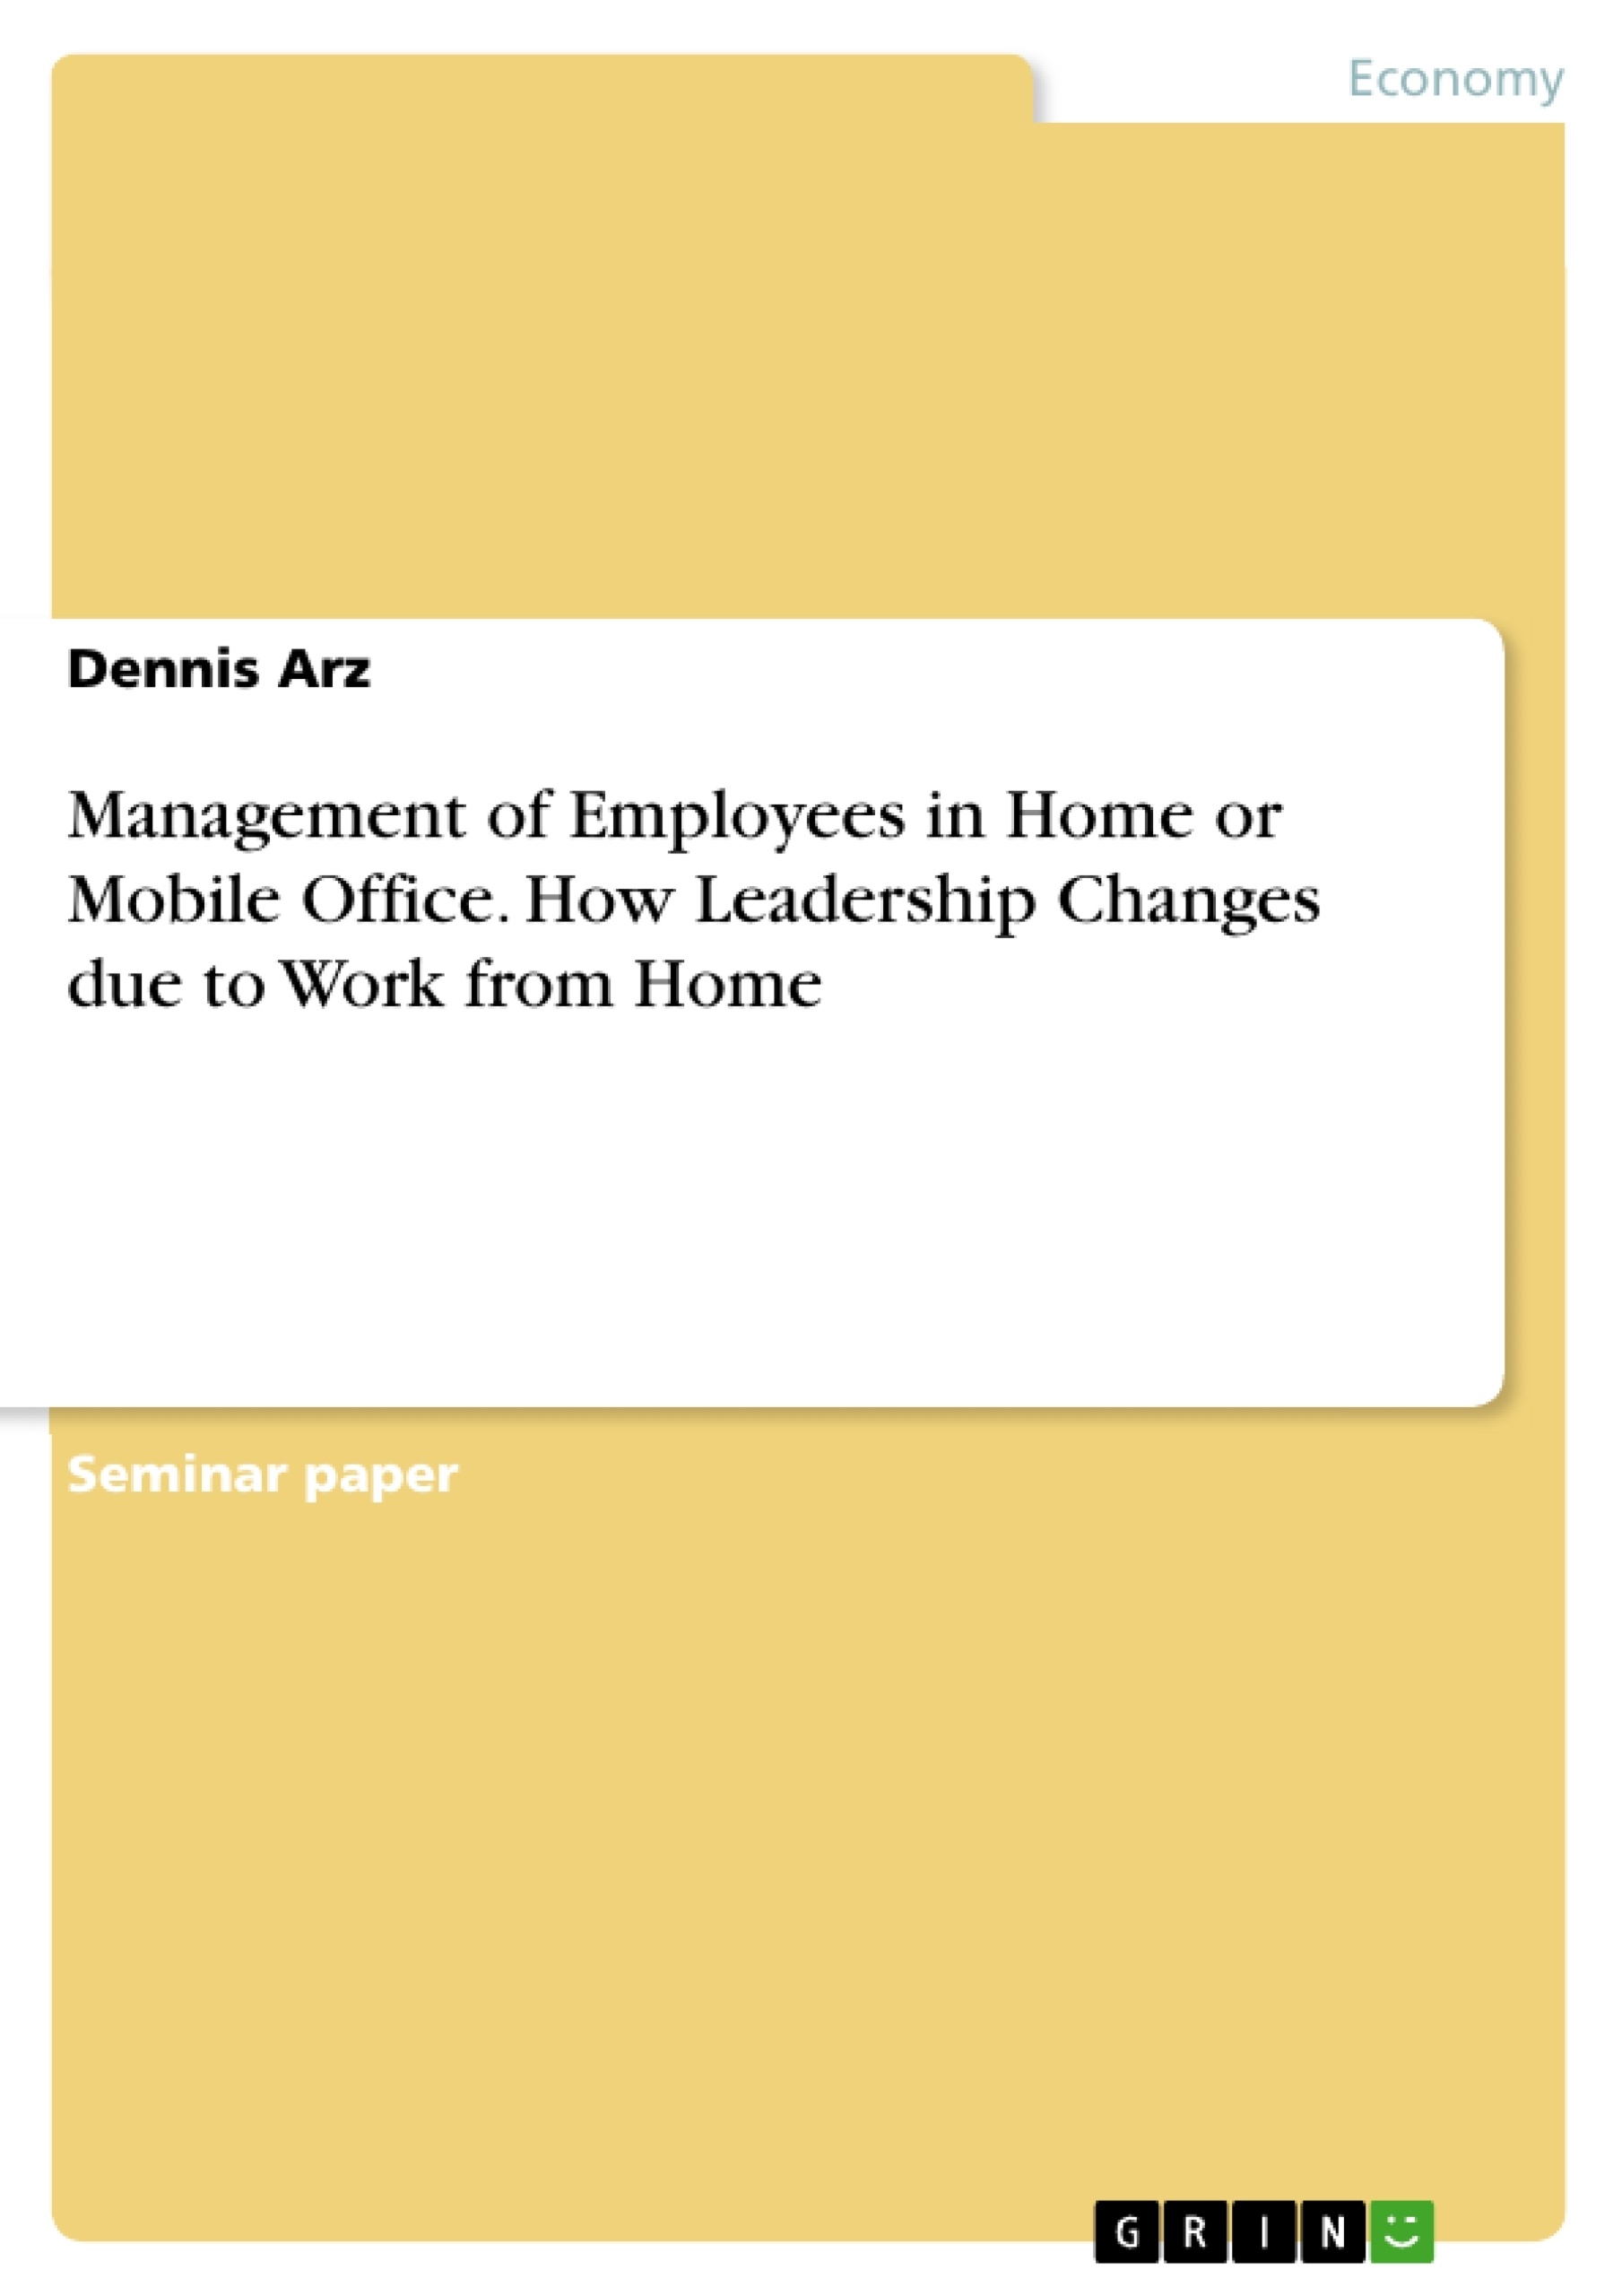 Title: Management of Employees in Home or Mobile Office. How Leadership Changes due to Work from Home